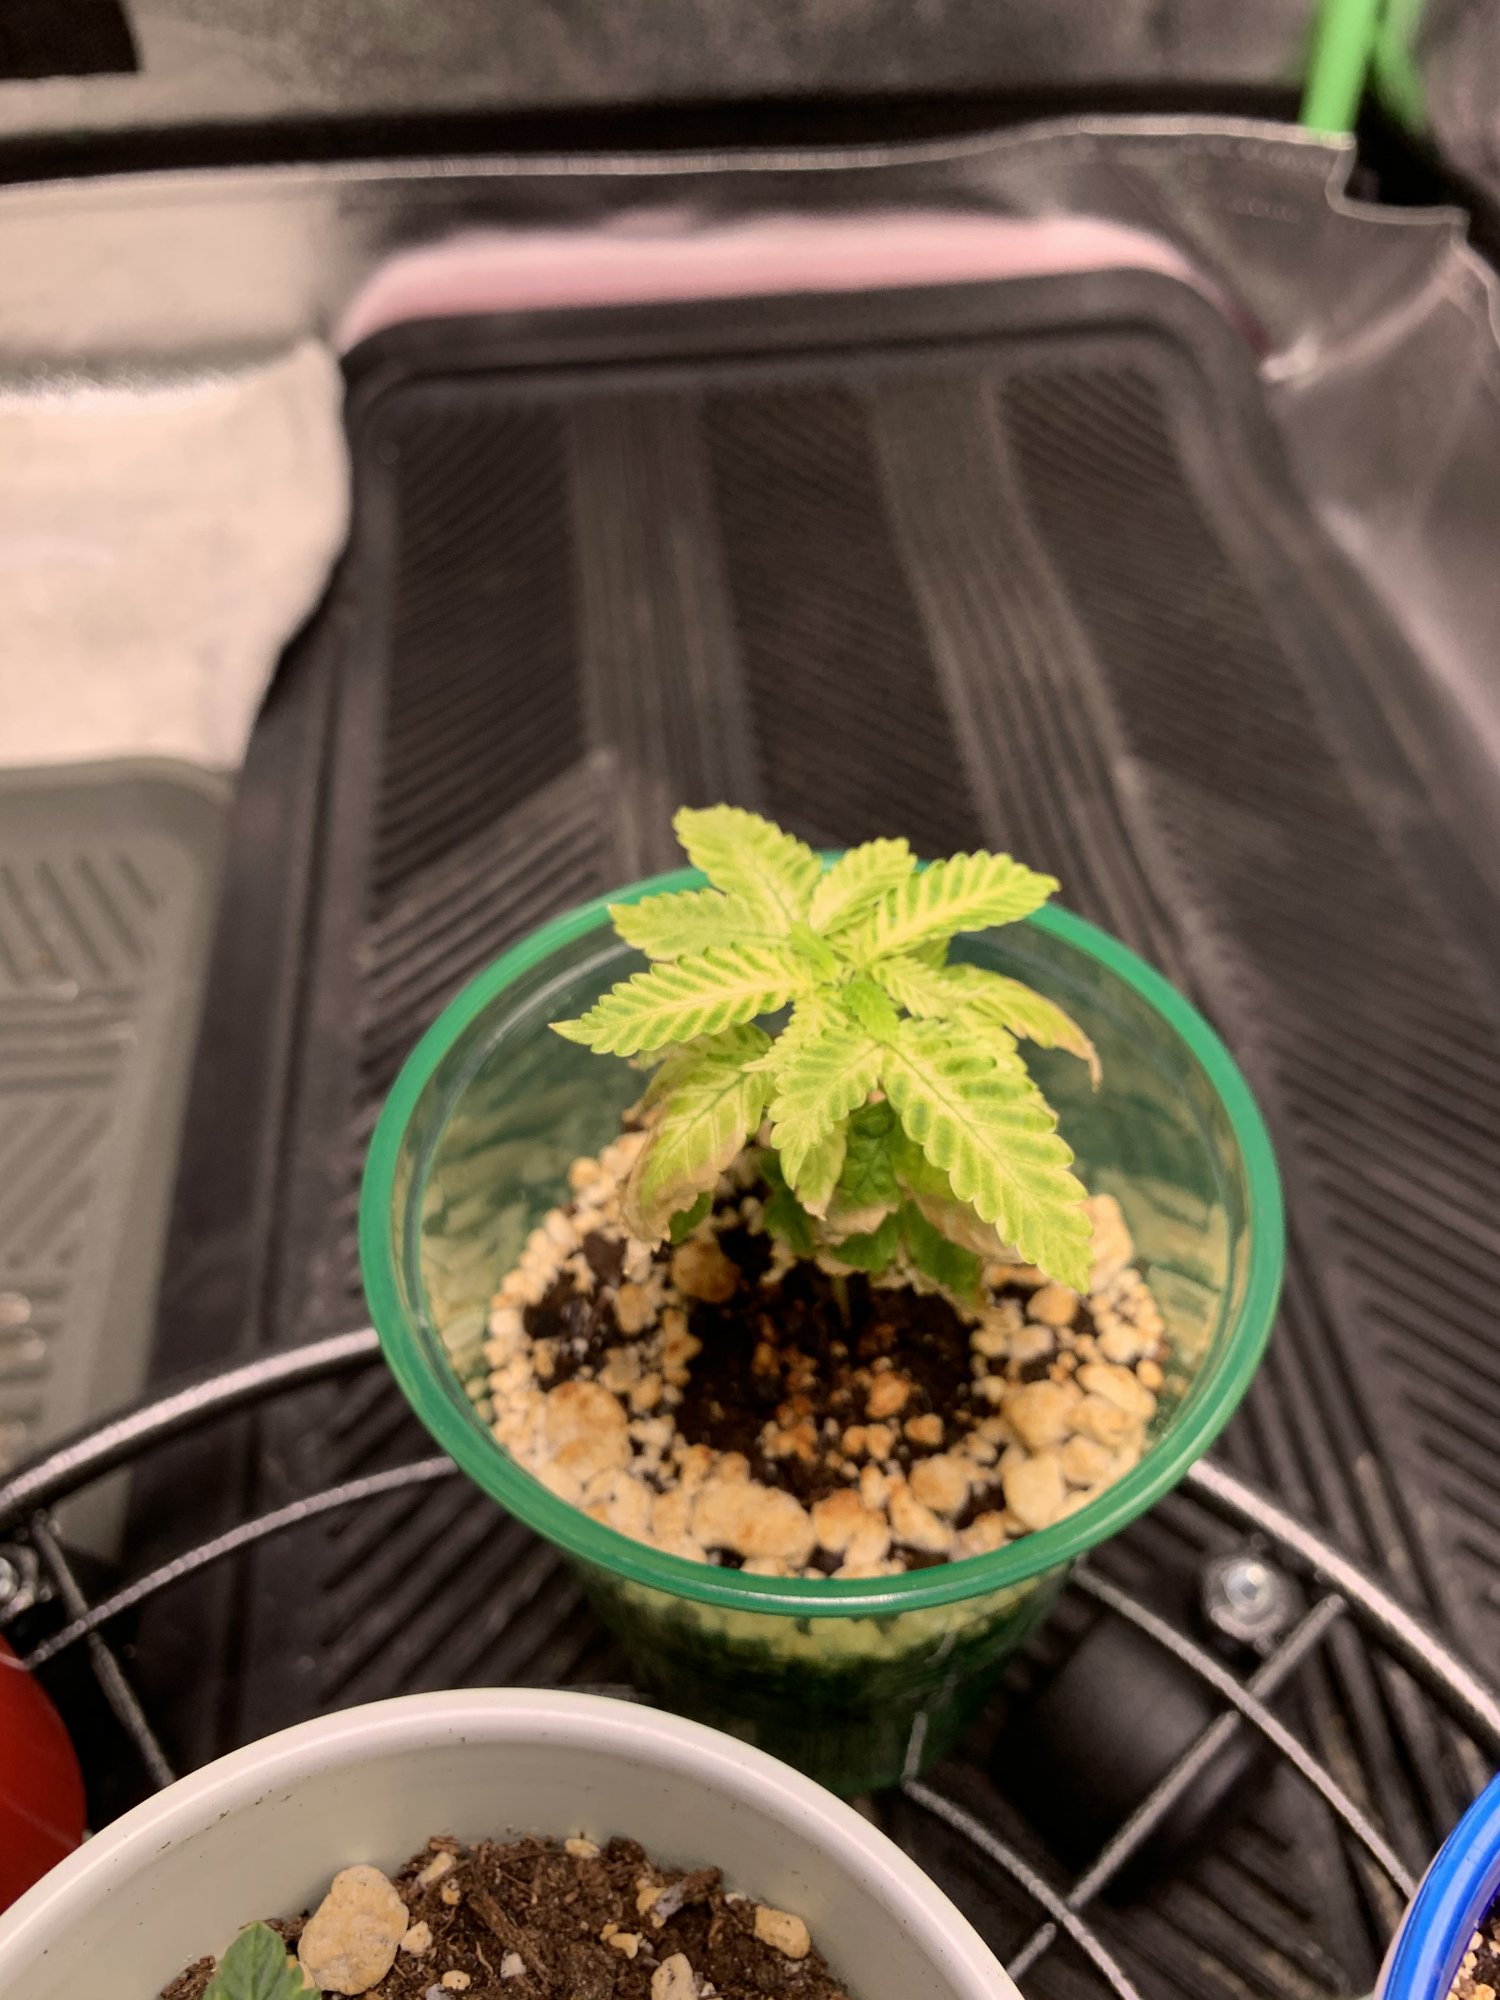 Yellowing veins and failing seedlings 2